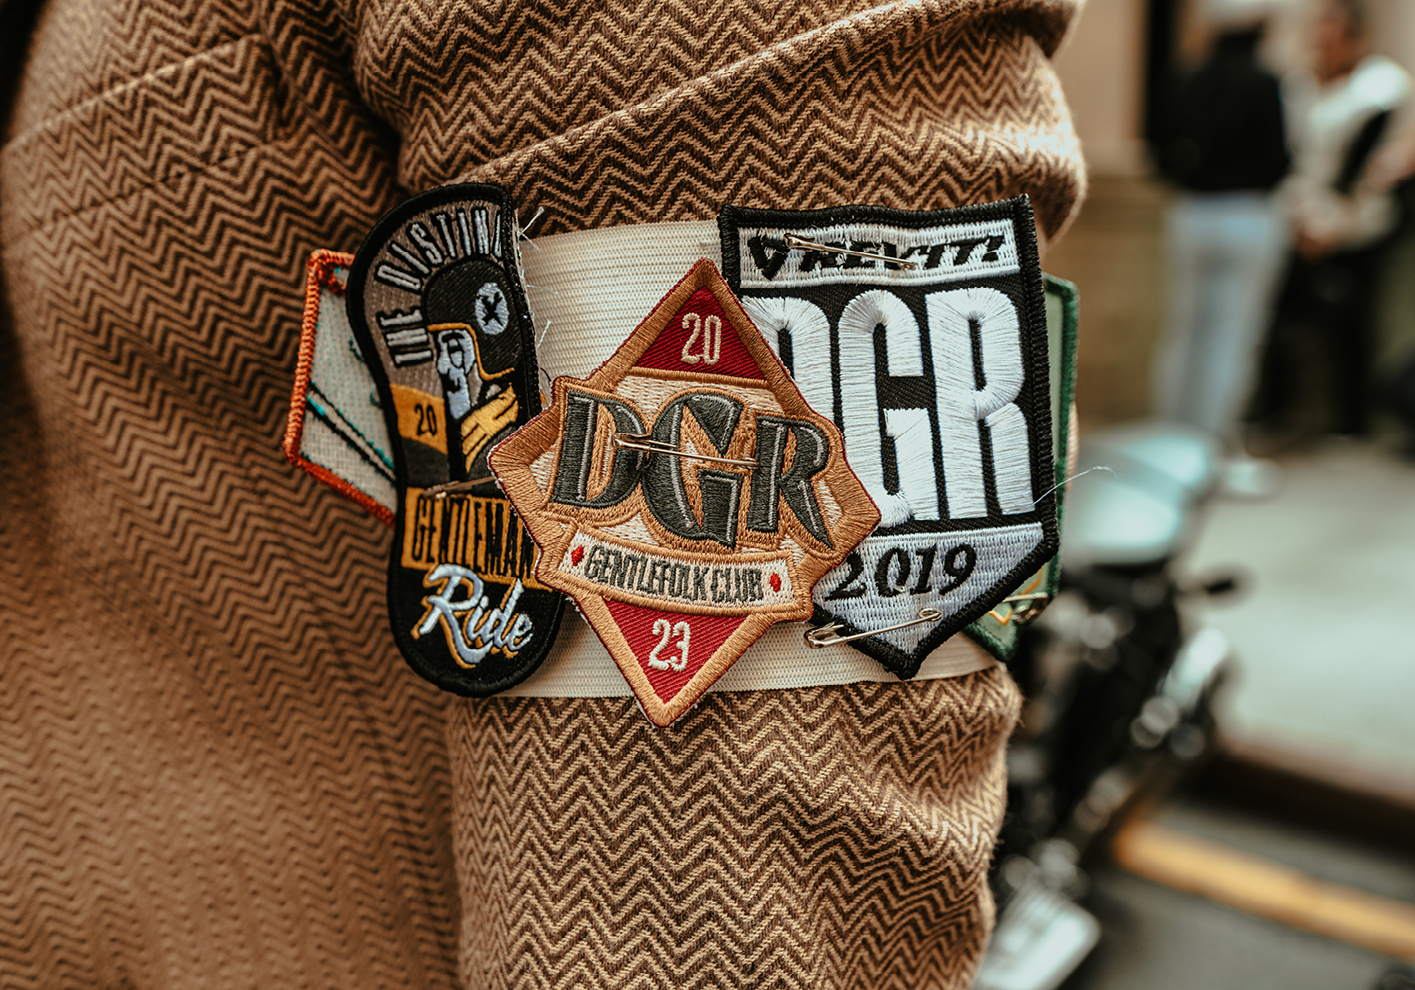 The Distinguished Gentleman's Ride has been an annual event since 2012 and taken place in locations around the world, each with their own personality